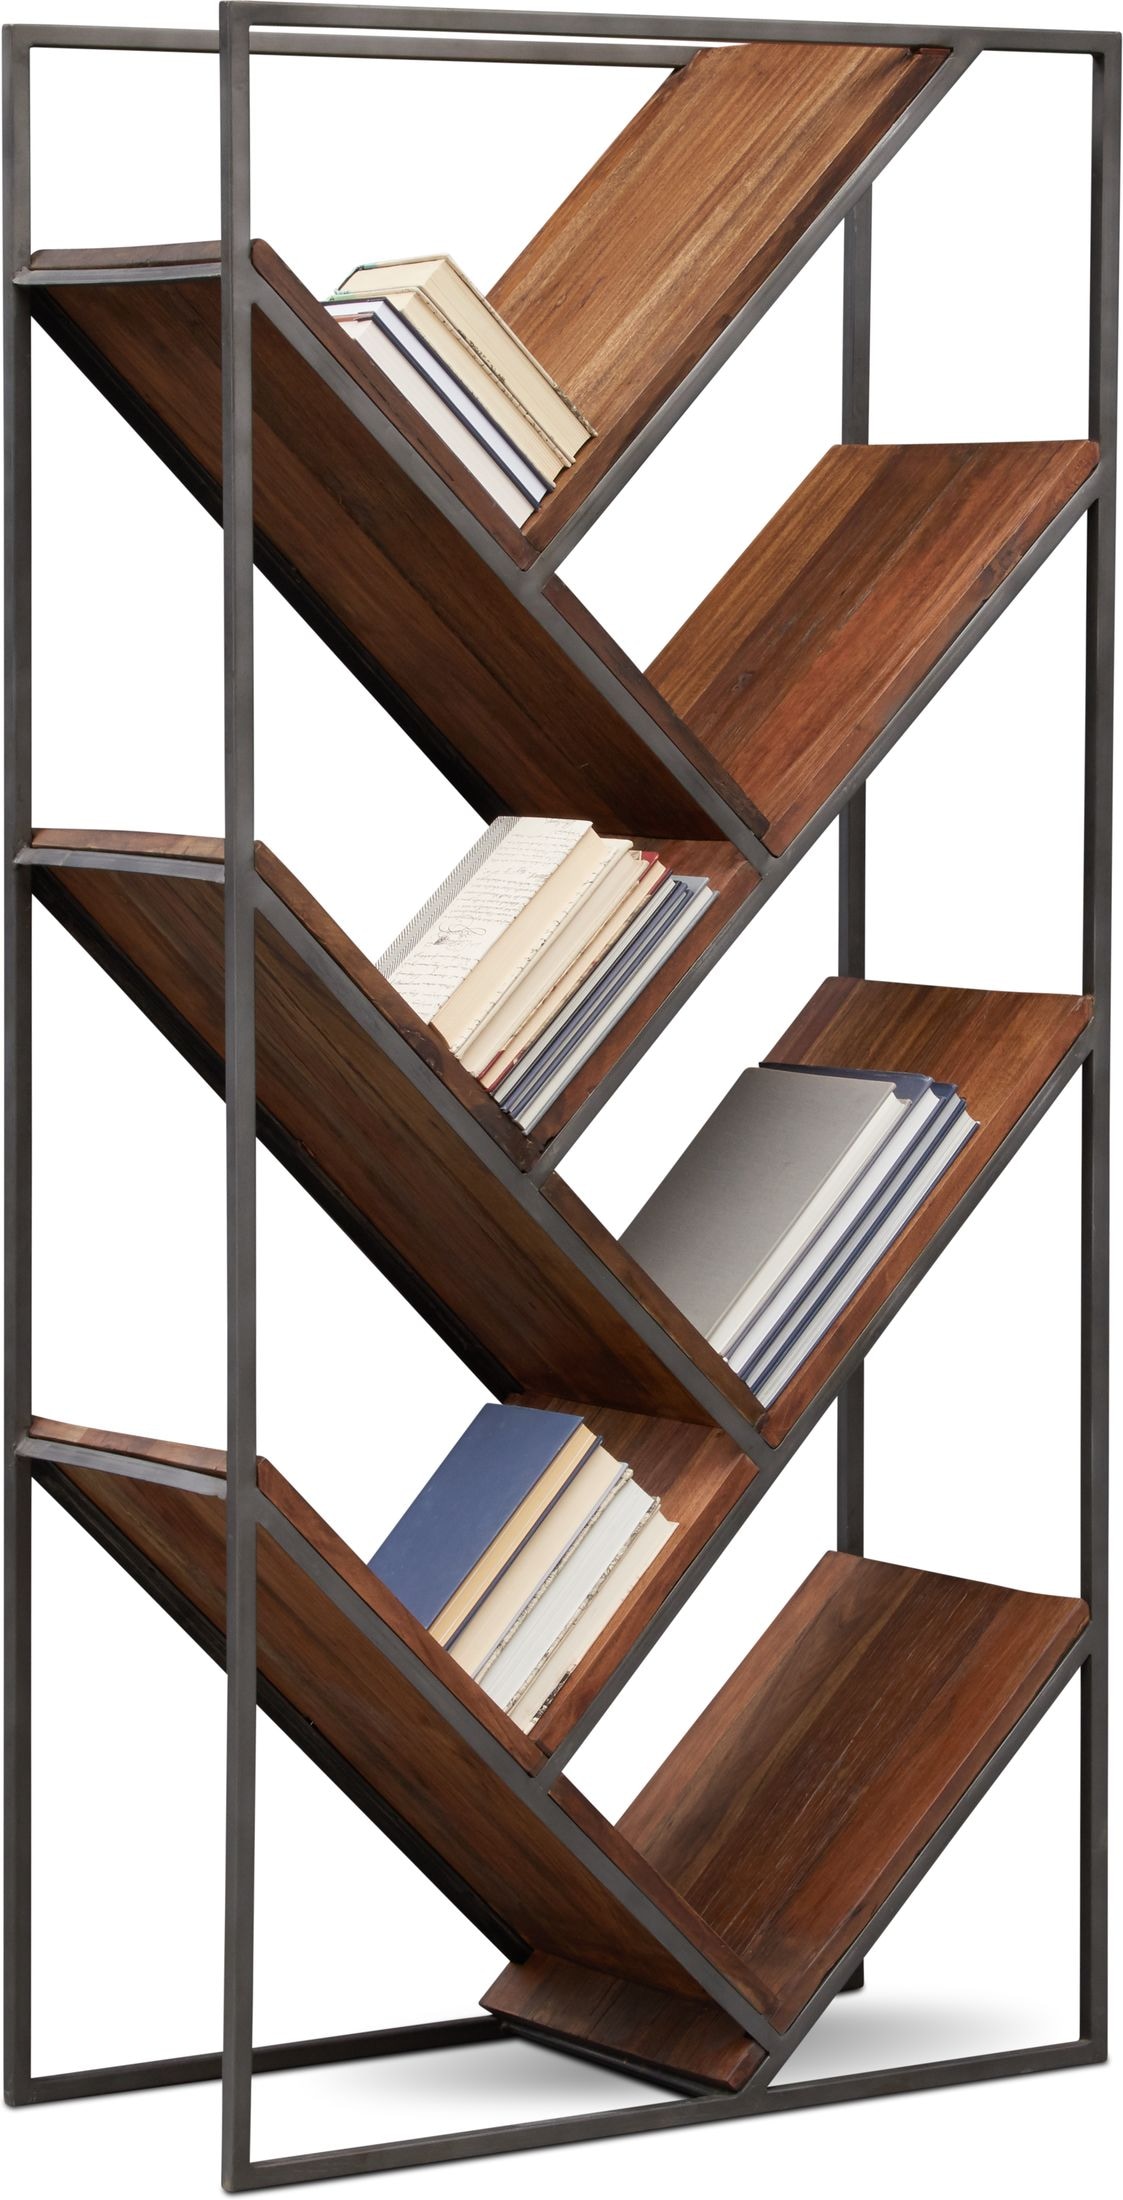 Undefined Value City Furniture, Value City Bedford Bookcase